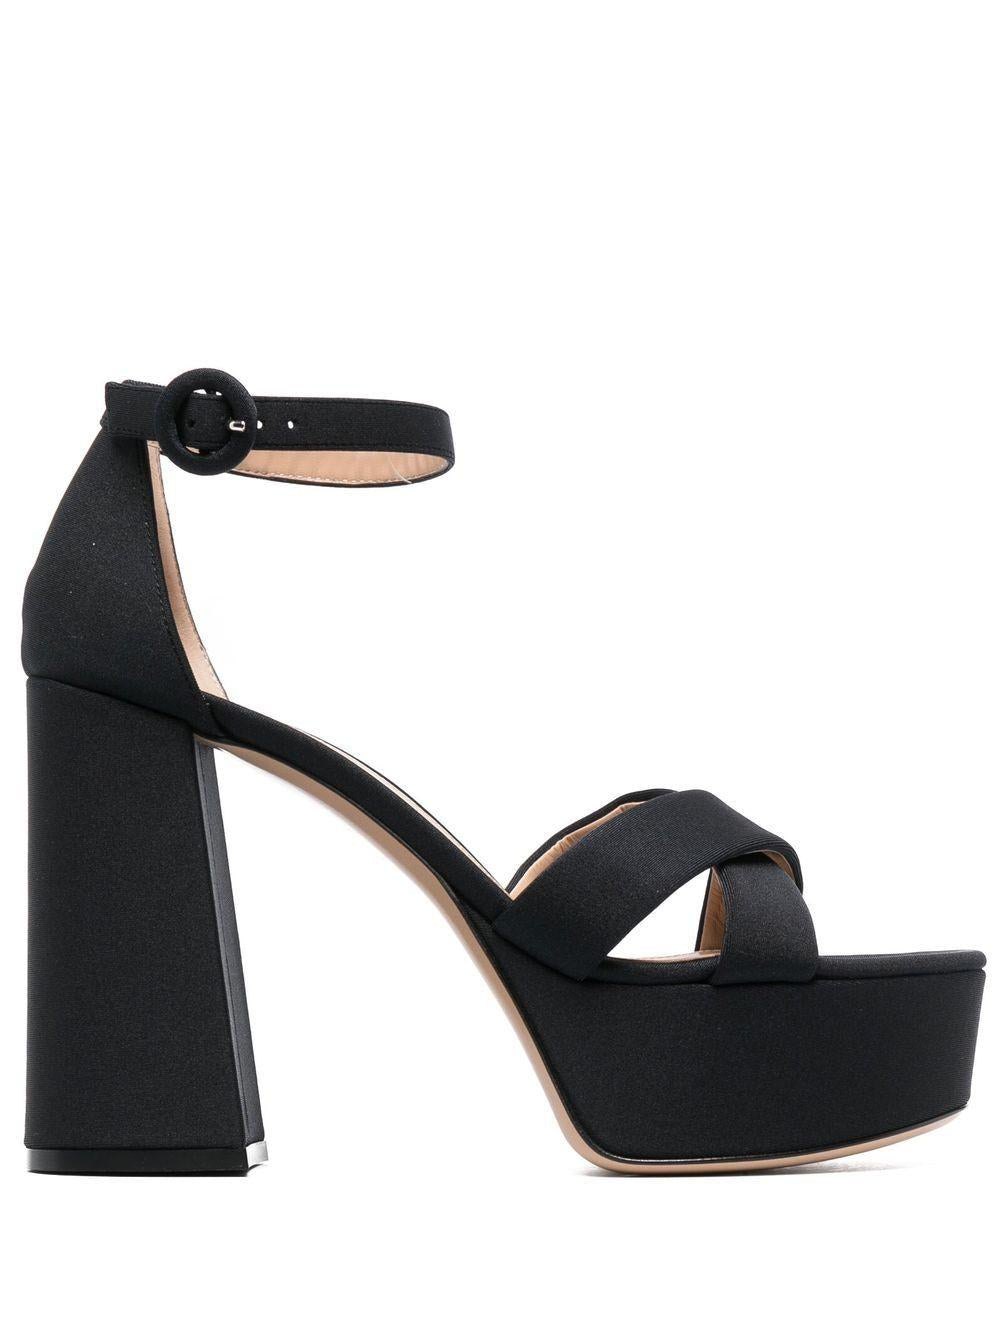 GIANVITO ROSSI Stylish Black Sandals with Platform Sole for Women - SS23 Collection